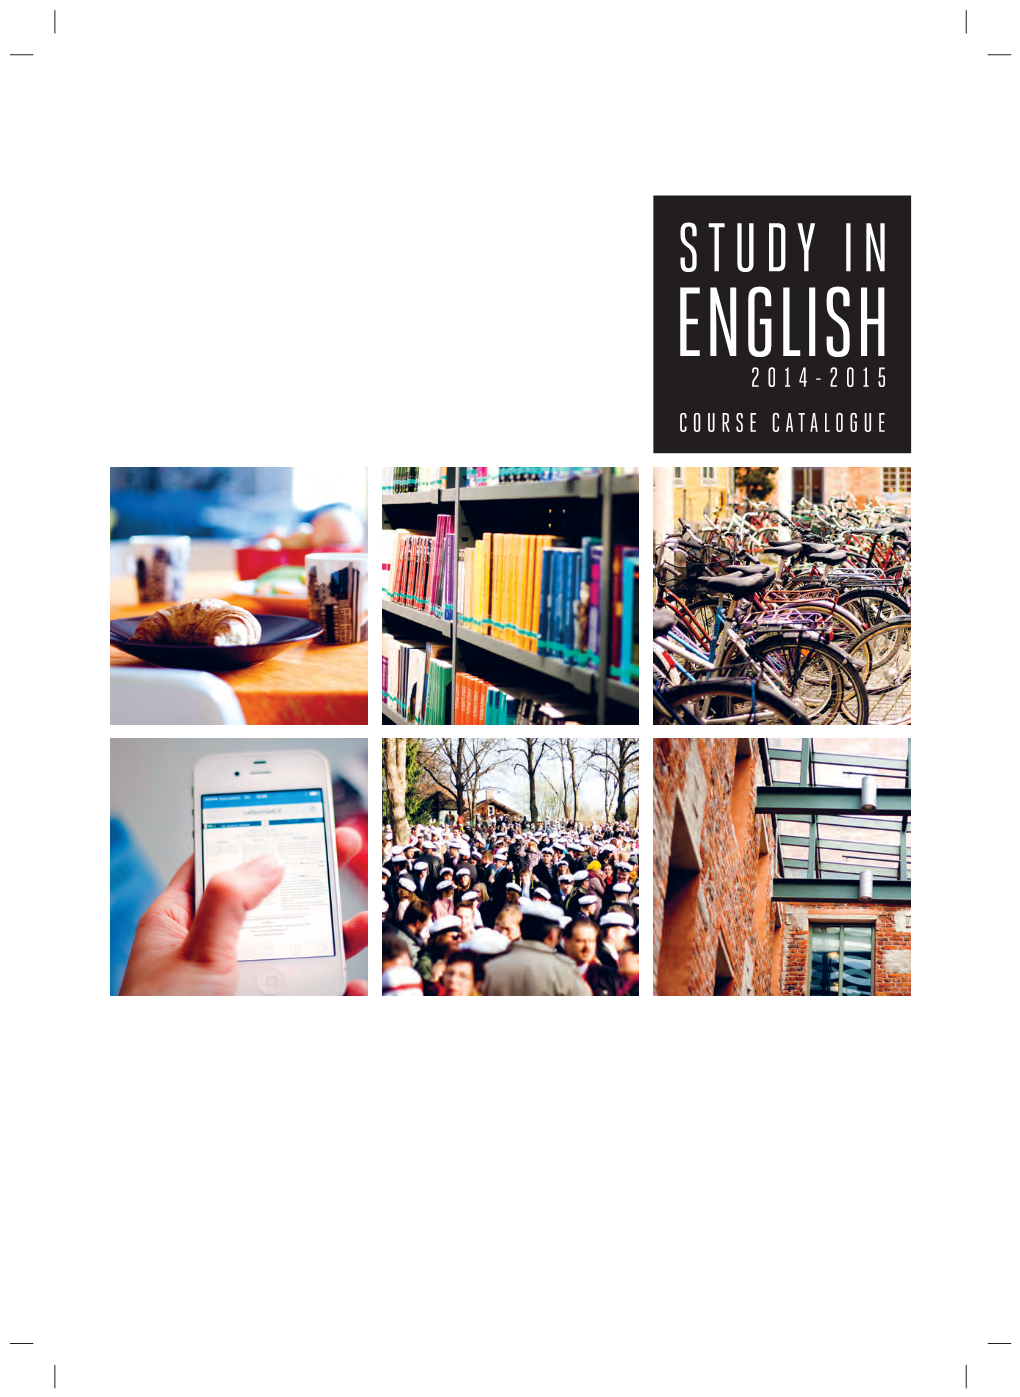 Study in English 2014-2015 Course Catalogue ﻿